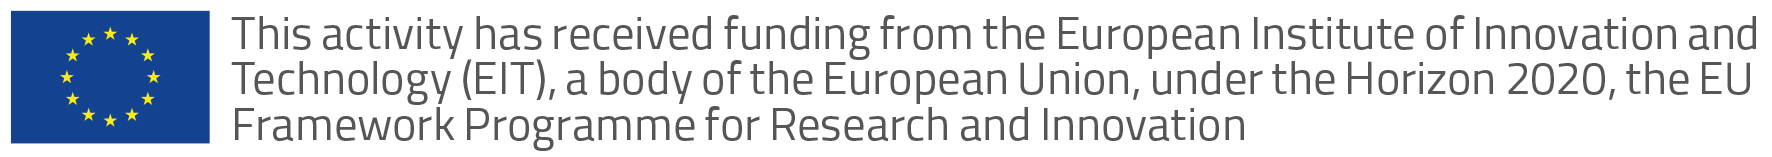 This activity has received funding from the European Institute of Technology (EIT), a body of the European Union, under the Horizon 2020, the EU Framework Programme for Research And Innovation